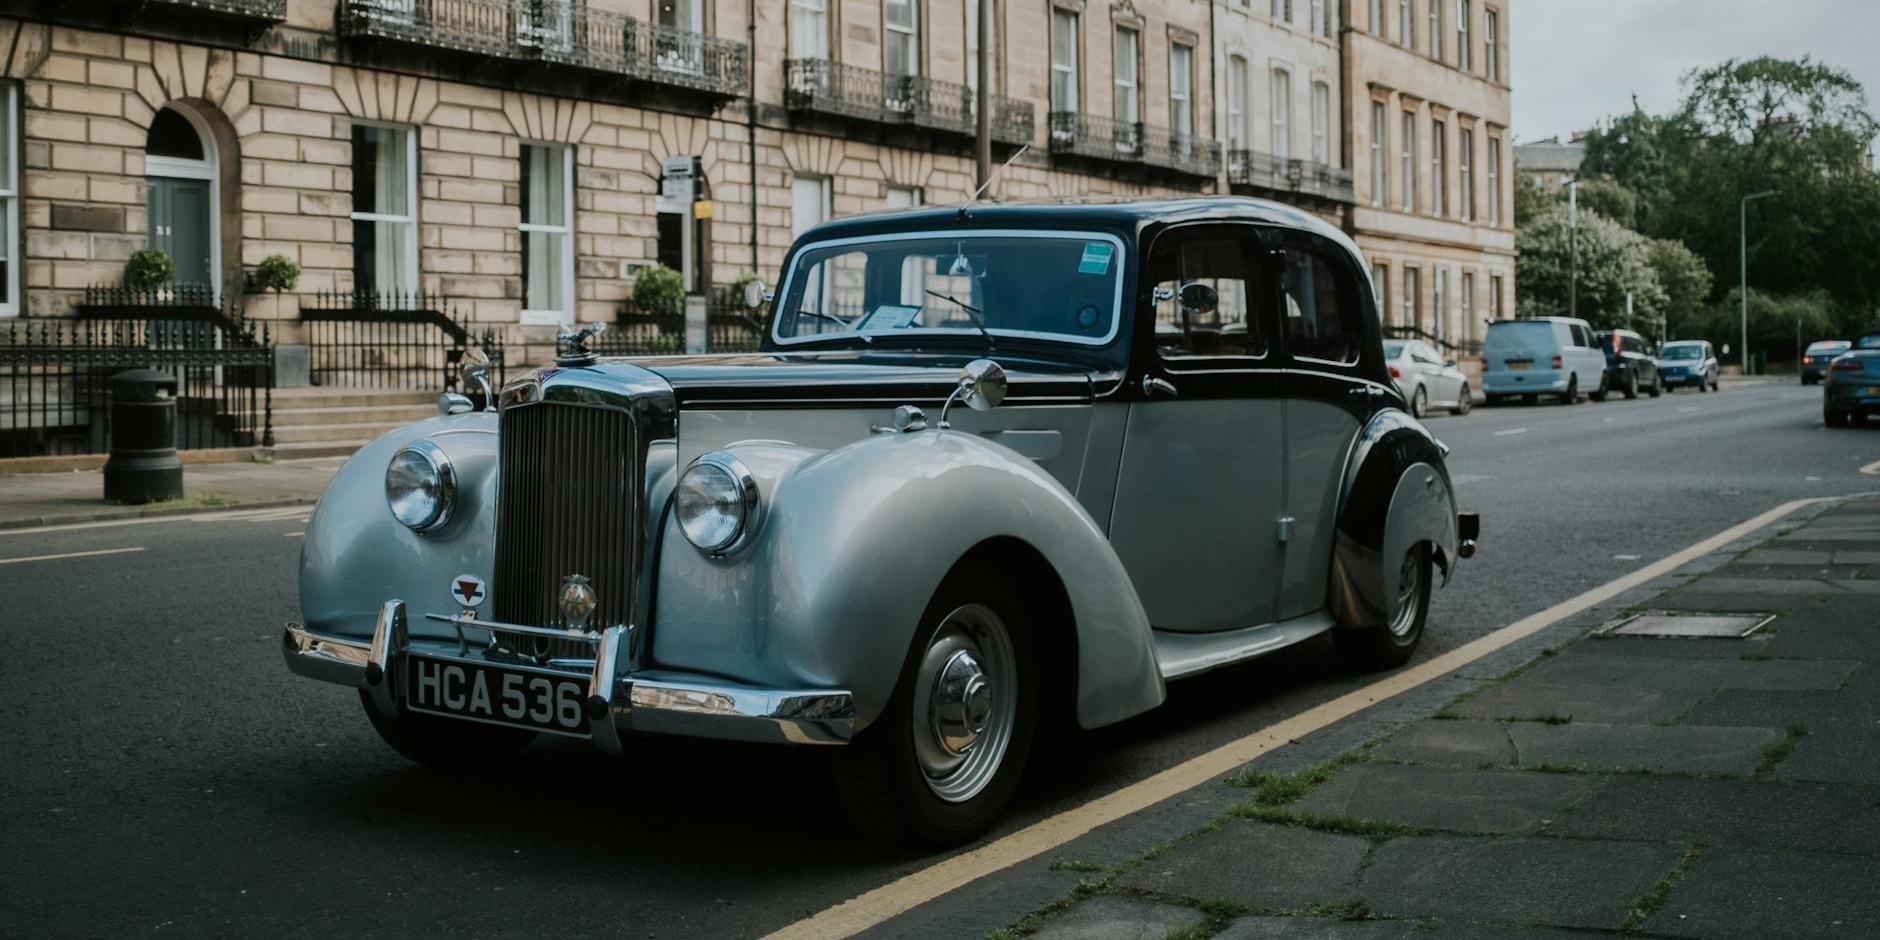 Top 5 Questions to Ask Before Booking Your Scottish Borders Wedding Car Service